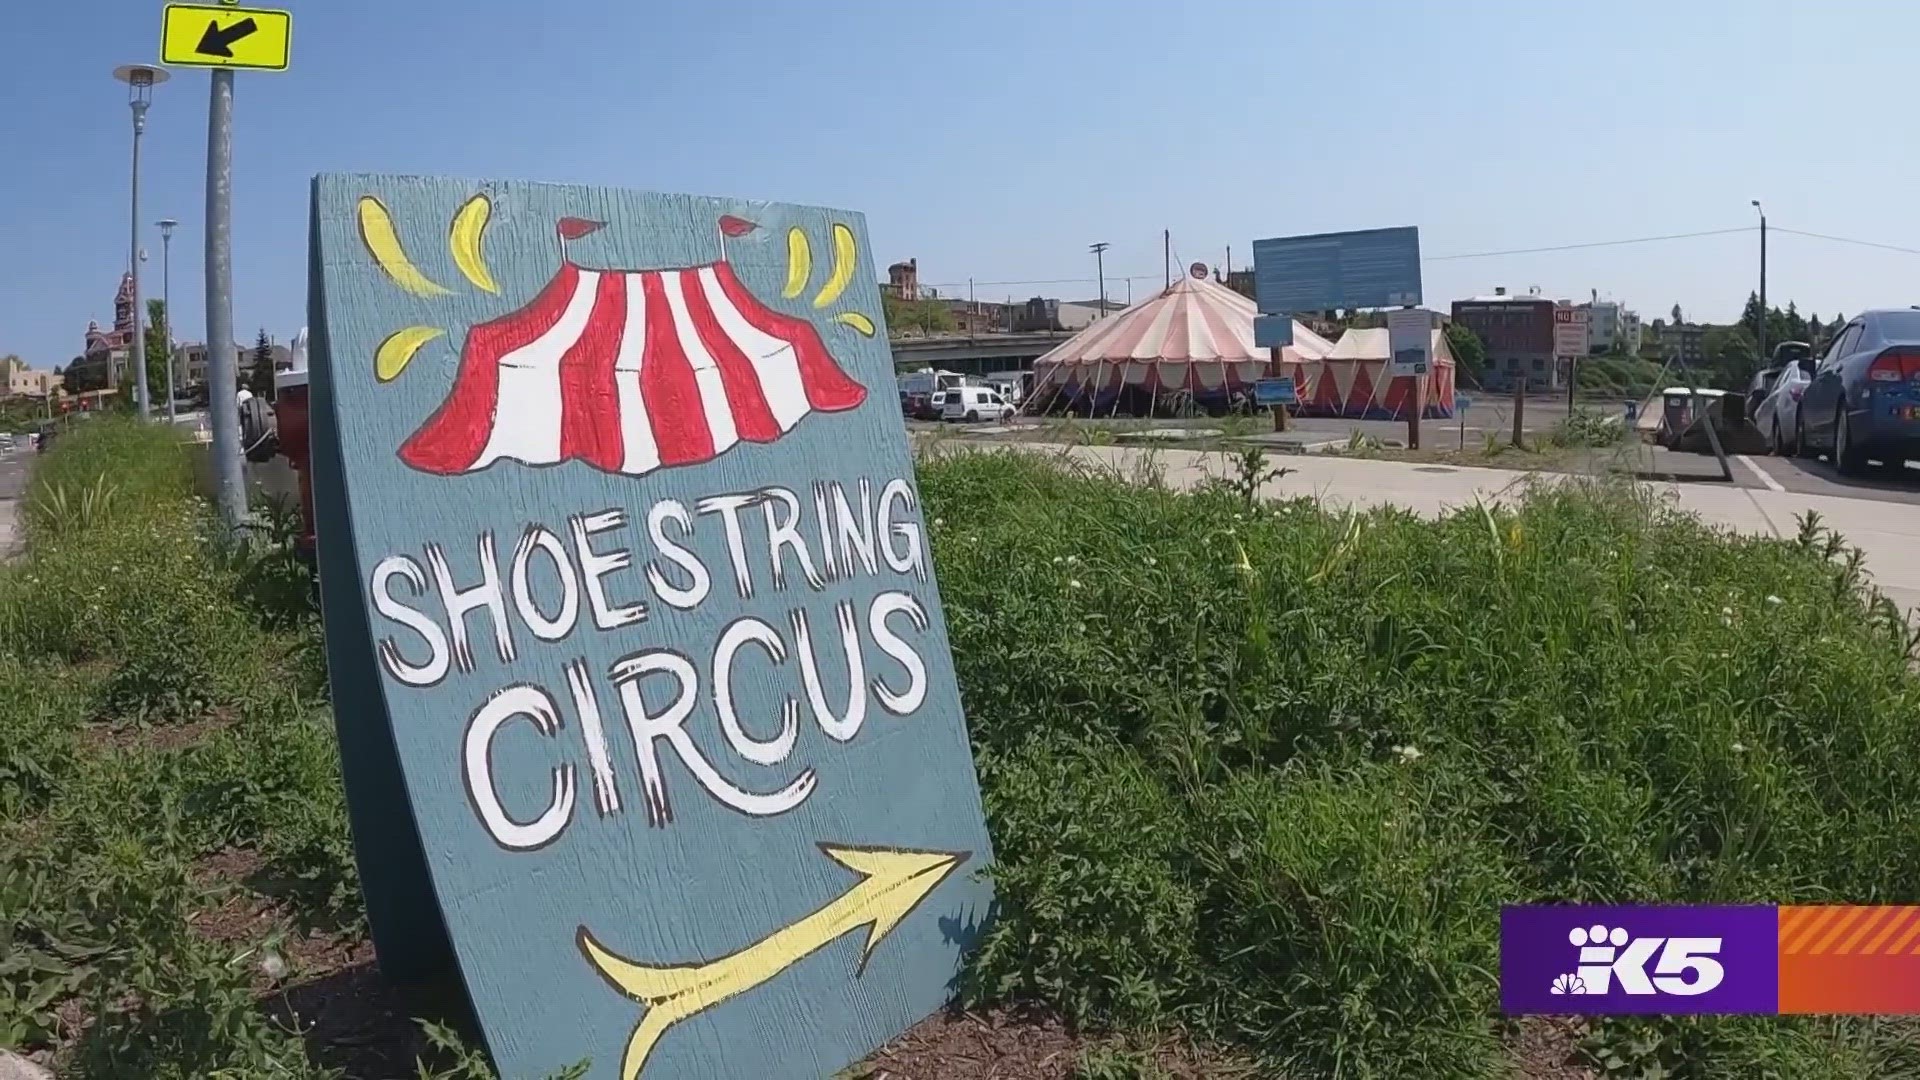 The homegrown circus puts up a tent and puts on a show. #k5evening